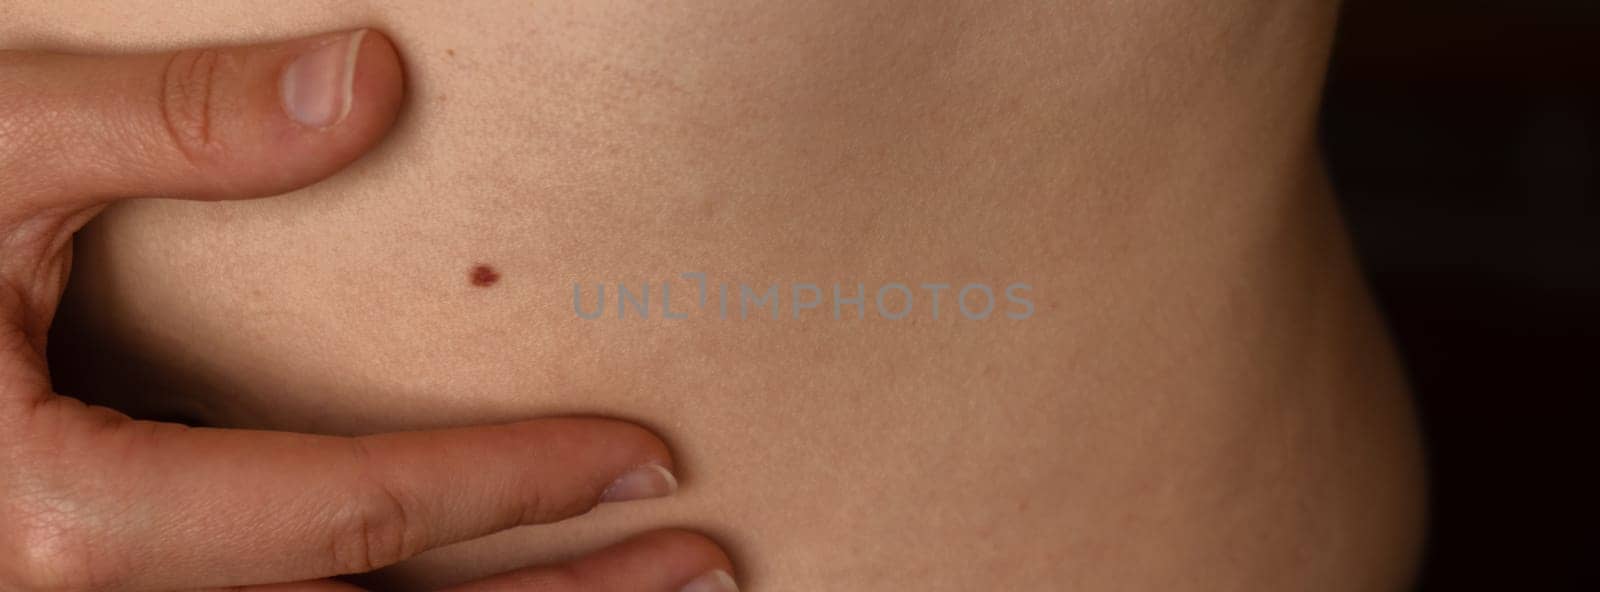 Unrecognizable woman showing her Birthmarks on skin Close up detail of the bare skin Banner Sun Exposure effect on skin, Health Effects of UV Radiation Woman with birthmarks Pigmentation by anna_stasiia